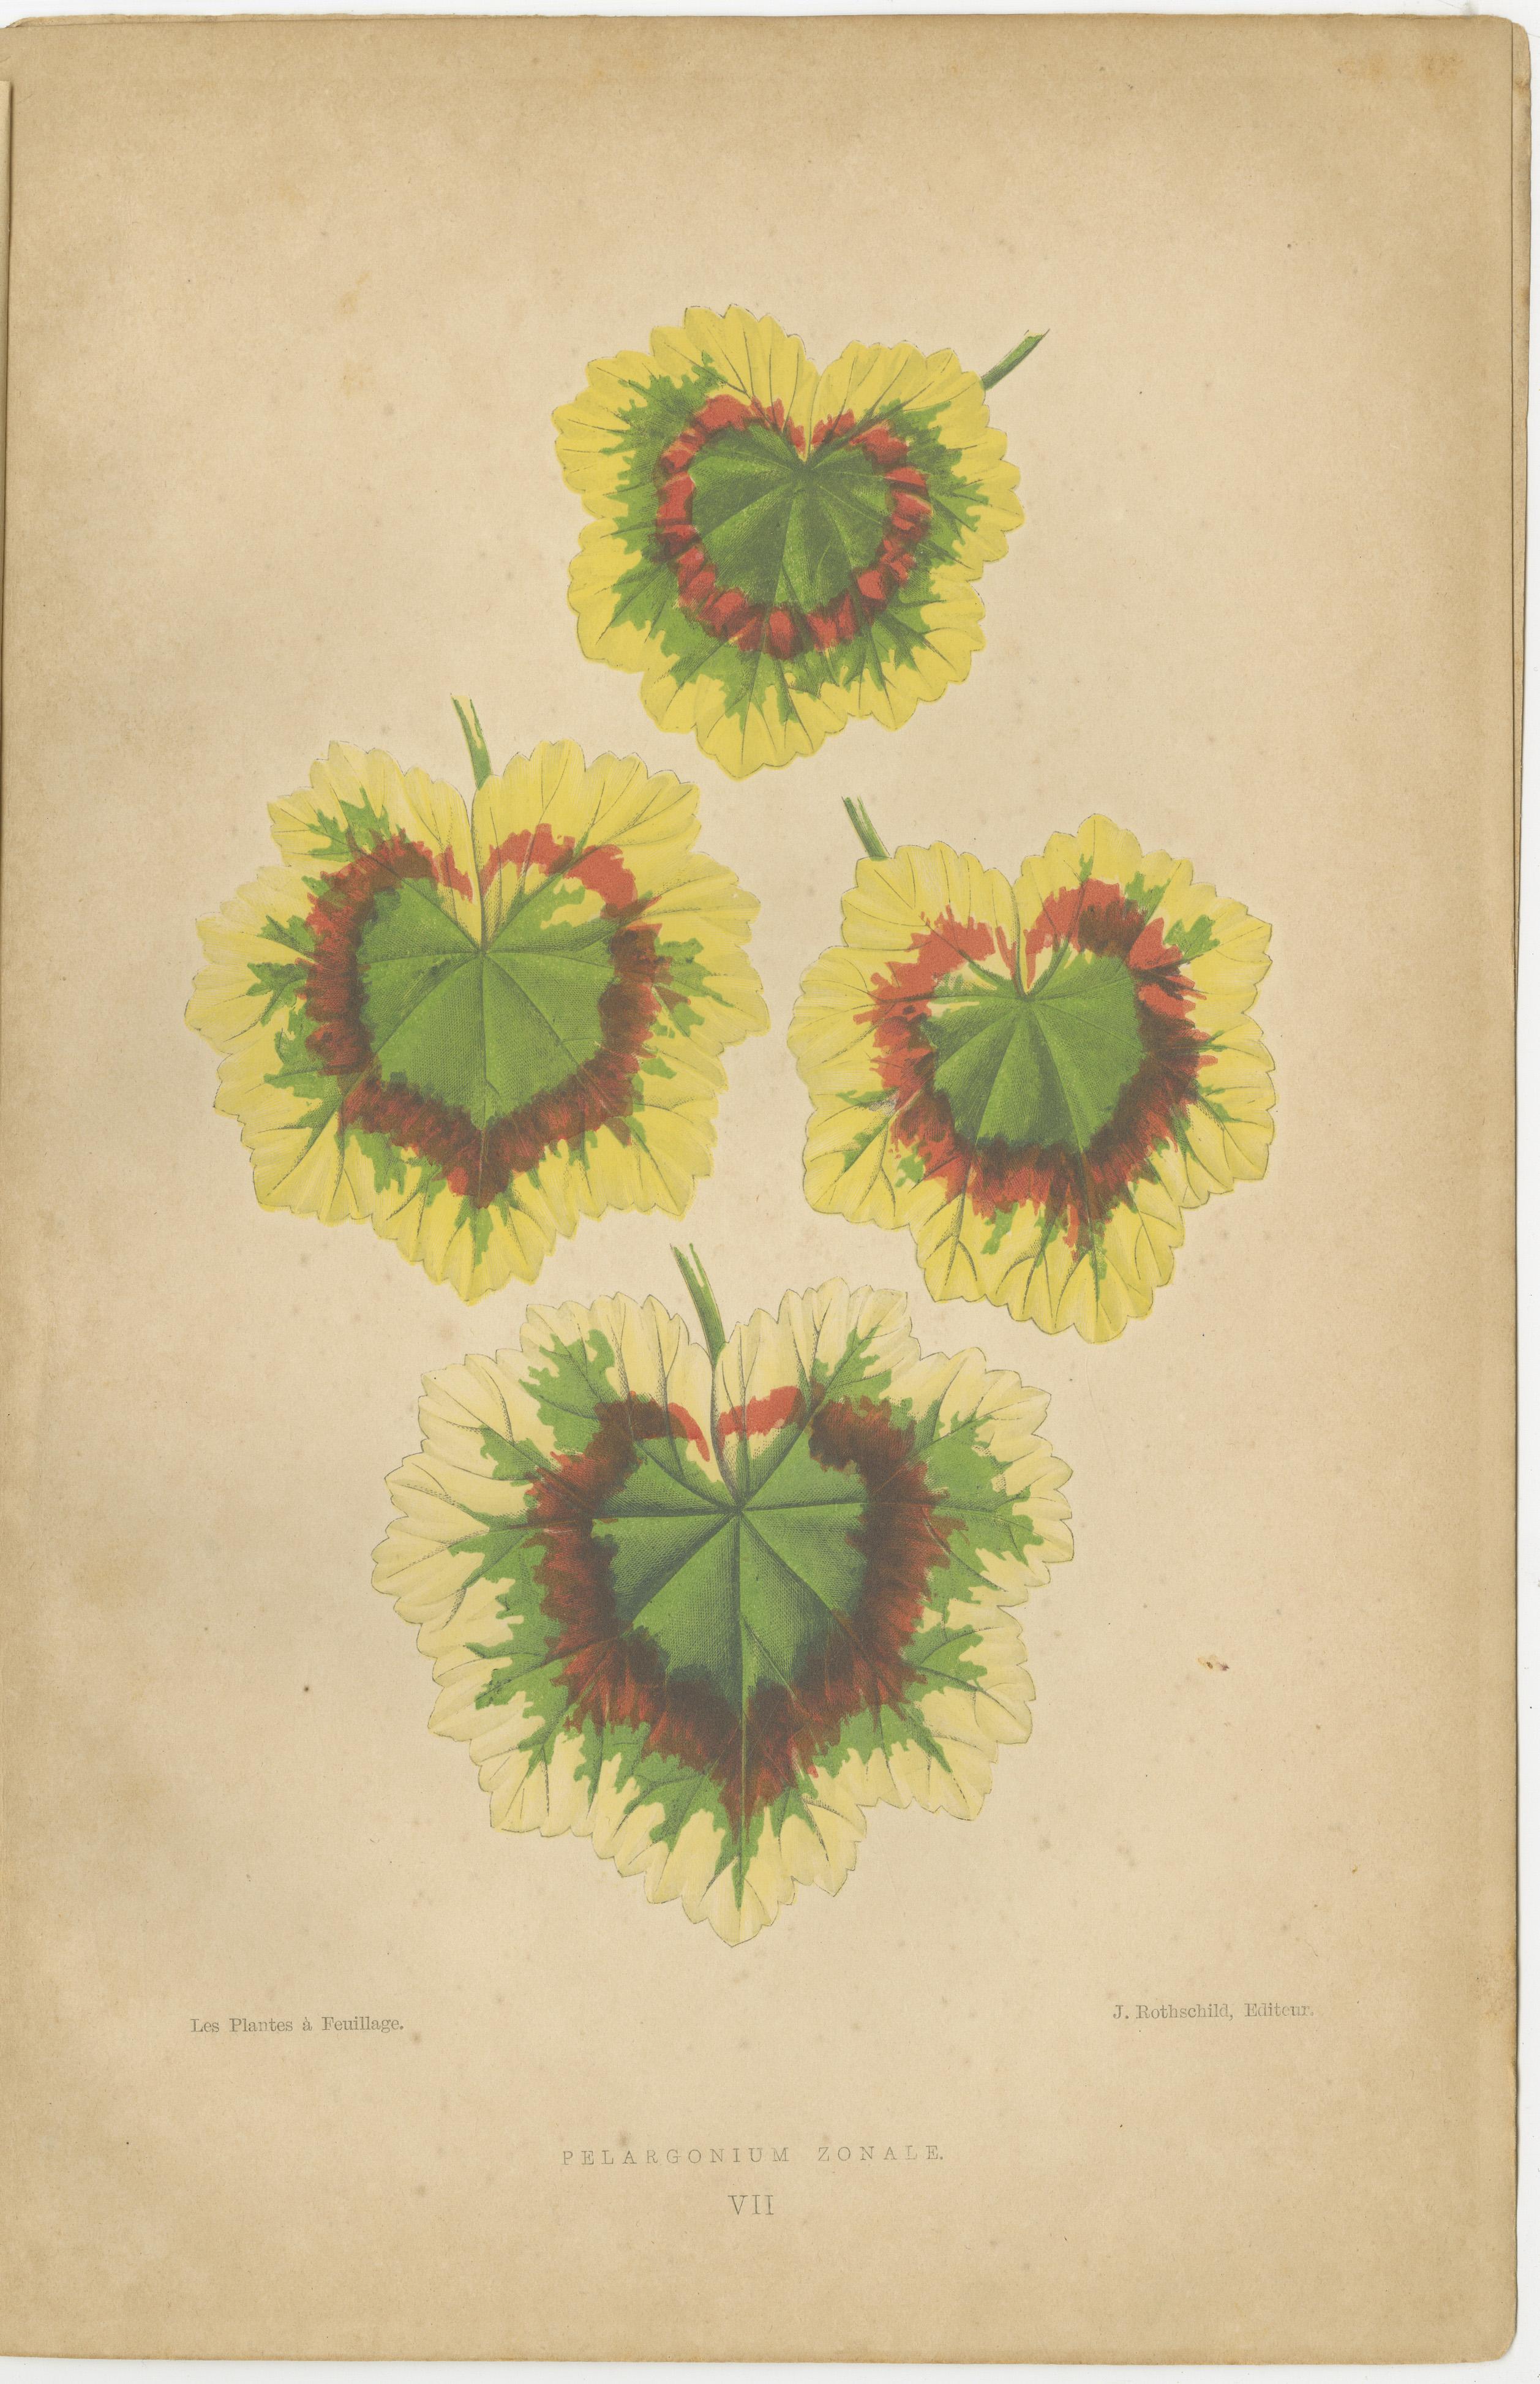 The image shows two botanical prints from 